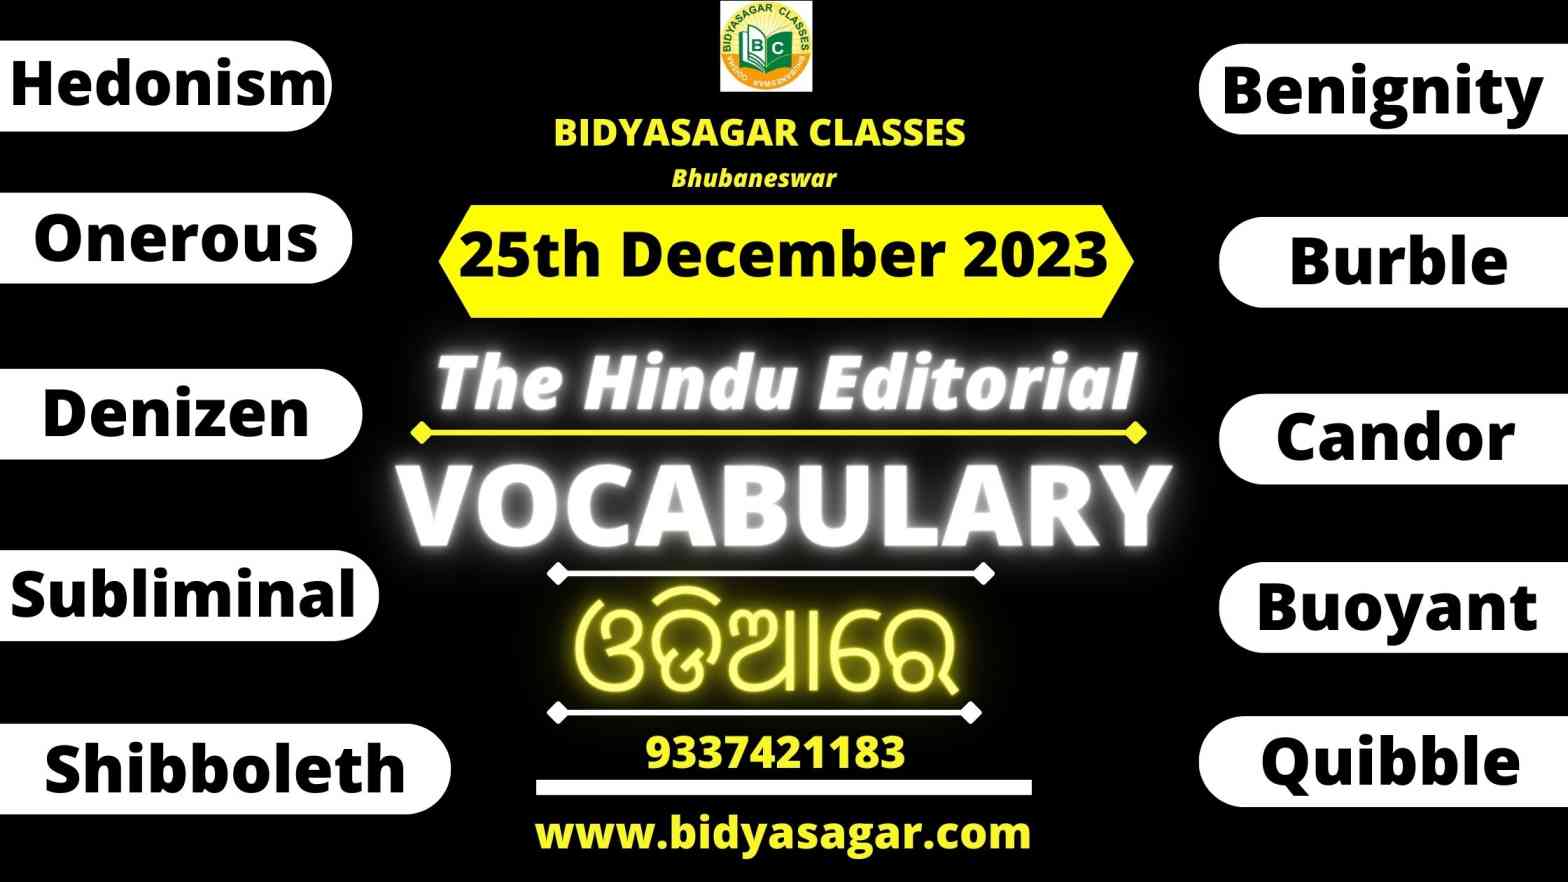 The Hindu Editorial Vocabulary of 25th December 2023